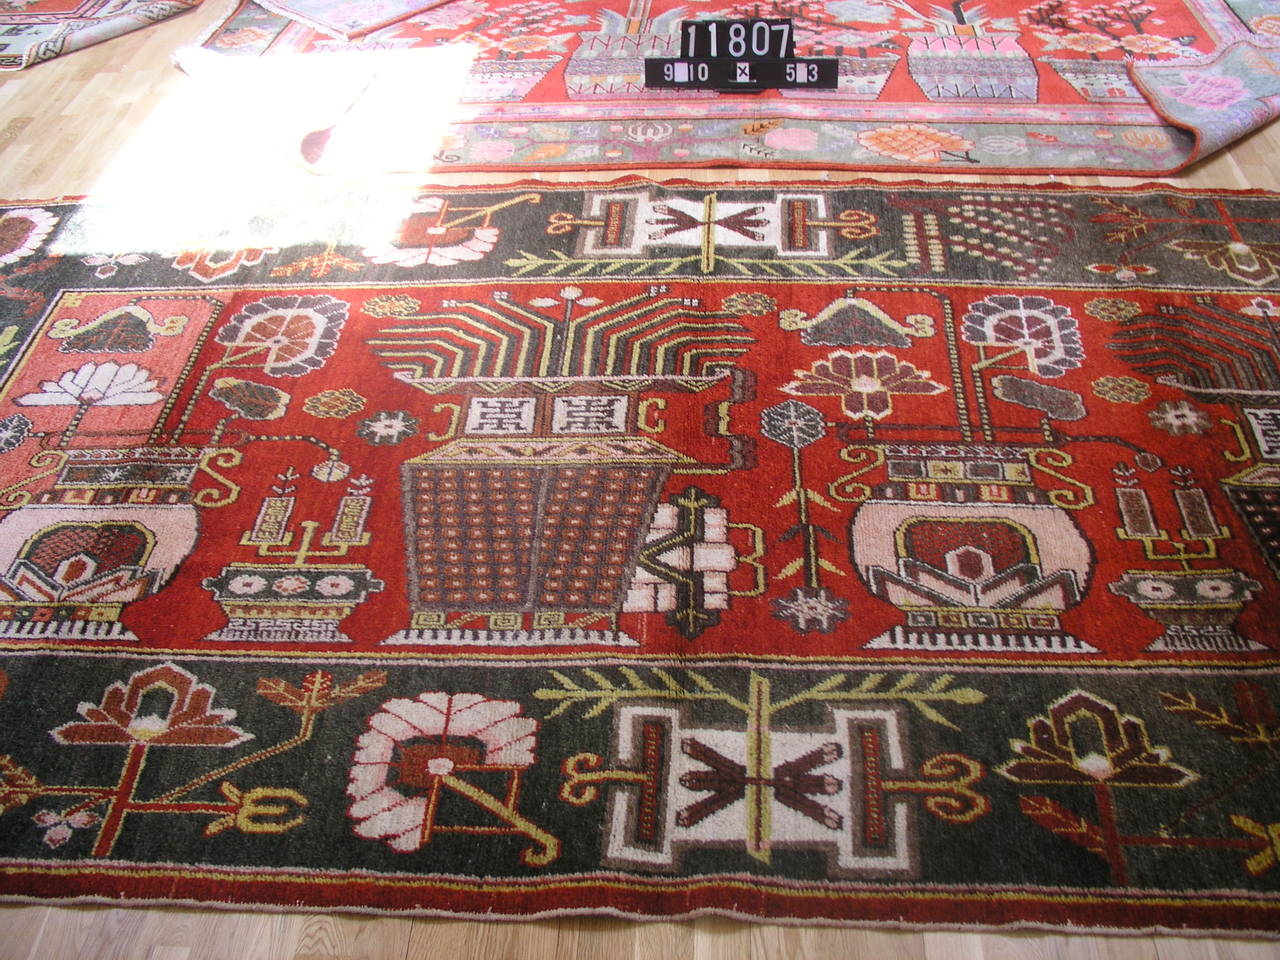 Antique pictorial Yarkand rug. The design depicts Art Deco period vases and motifs . Many Yarkand rugs tend to pictorial with Chinese details, Central Asian design schemes and Western vivid coloring.  This rug is woven using horse hair and wool,